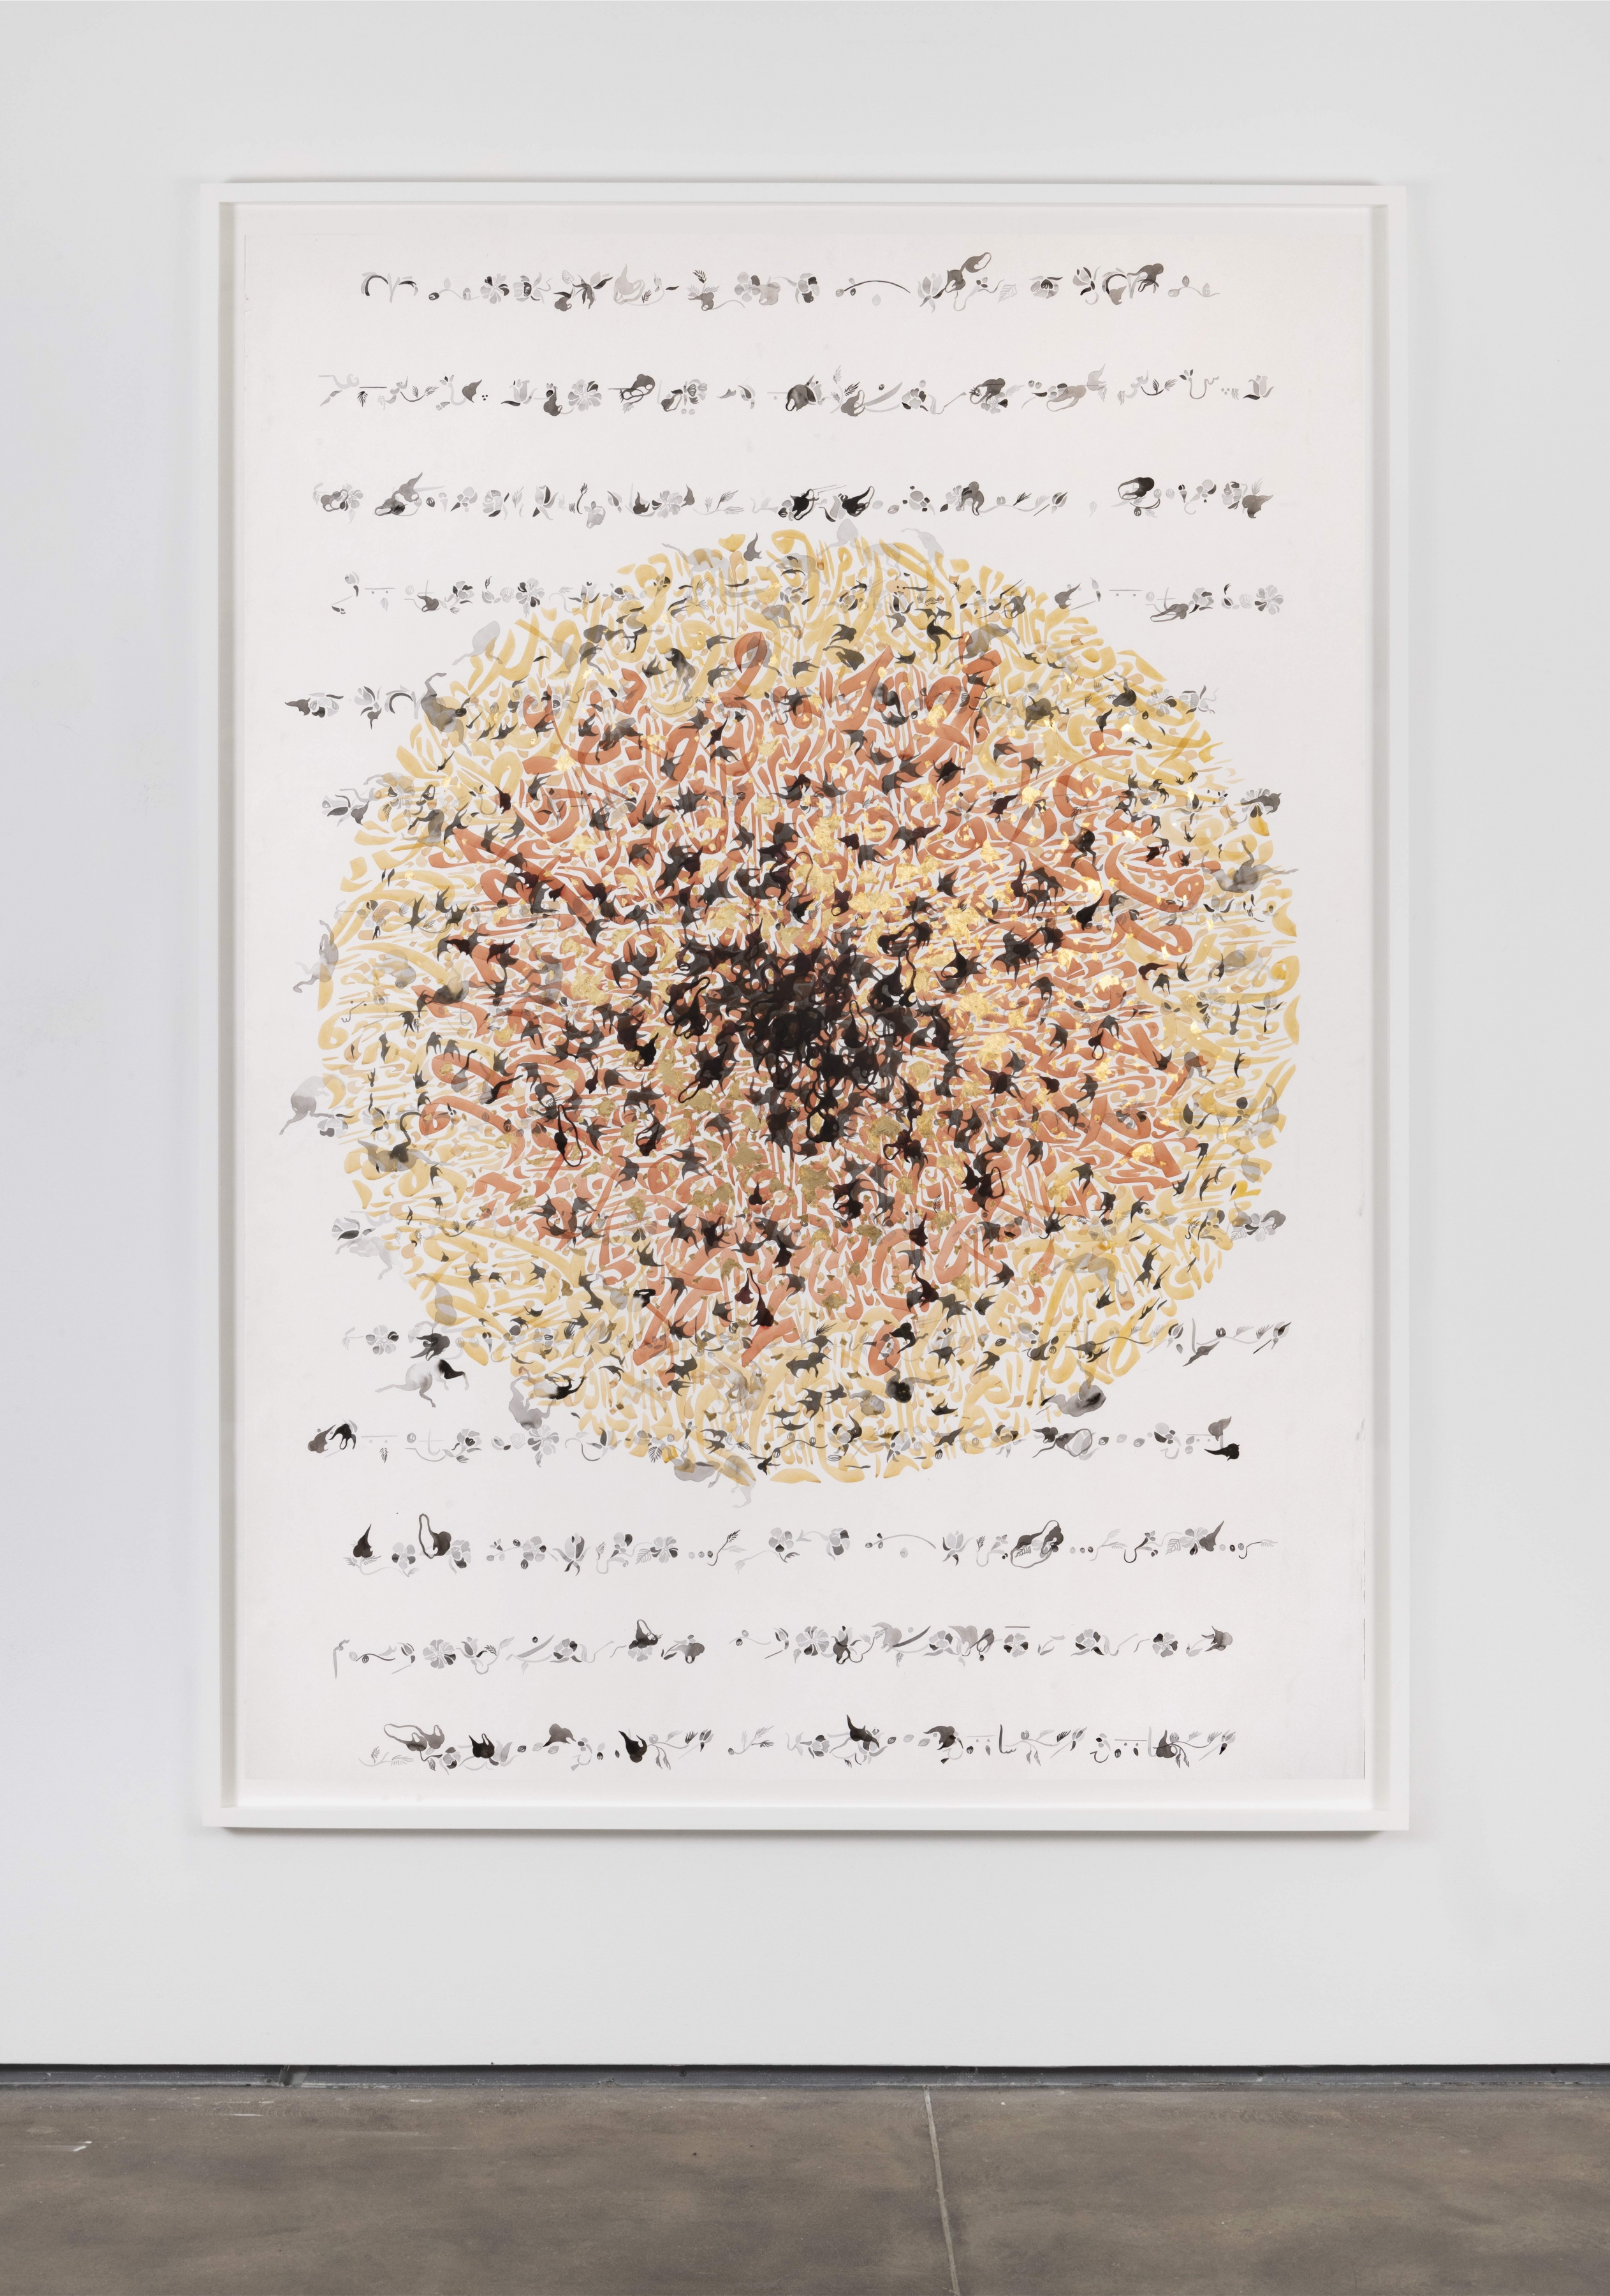 Constitutions of the Globe, 2019-2020
ink, gouache and gold leaf on paper
paper: 91 3/4 x 60 3/8 inches (233 x 153.4 cm)
&nbsp;